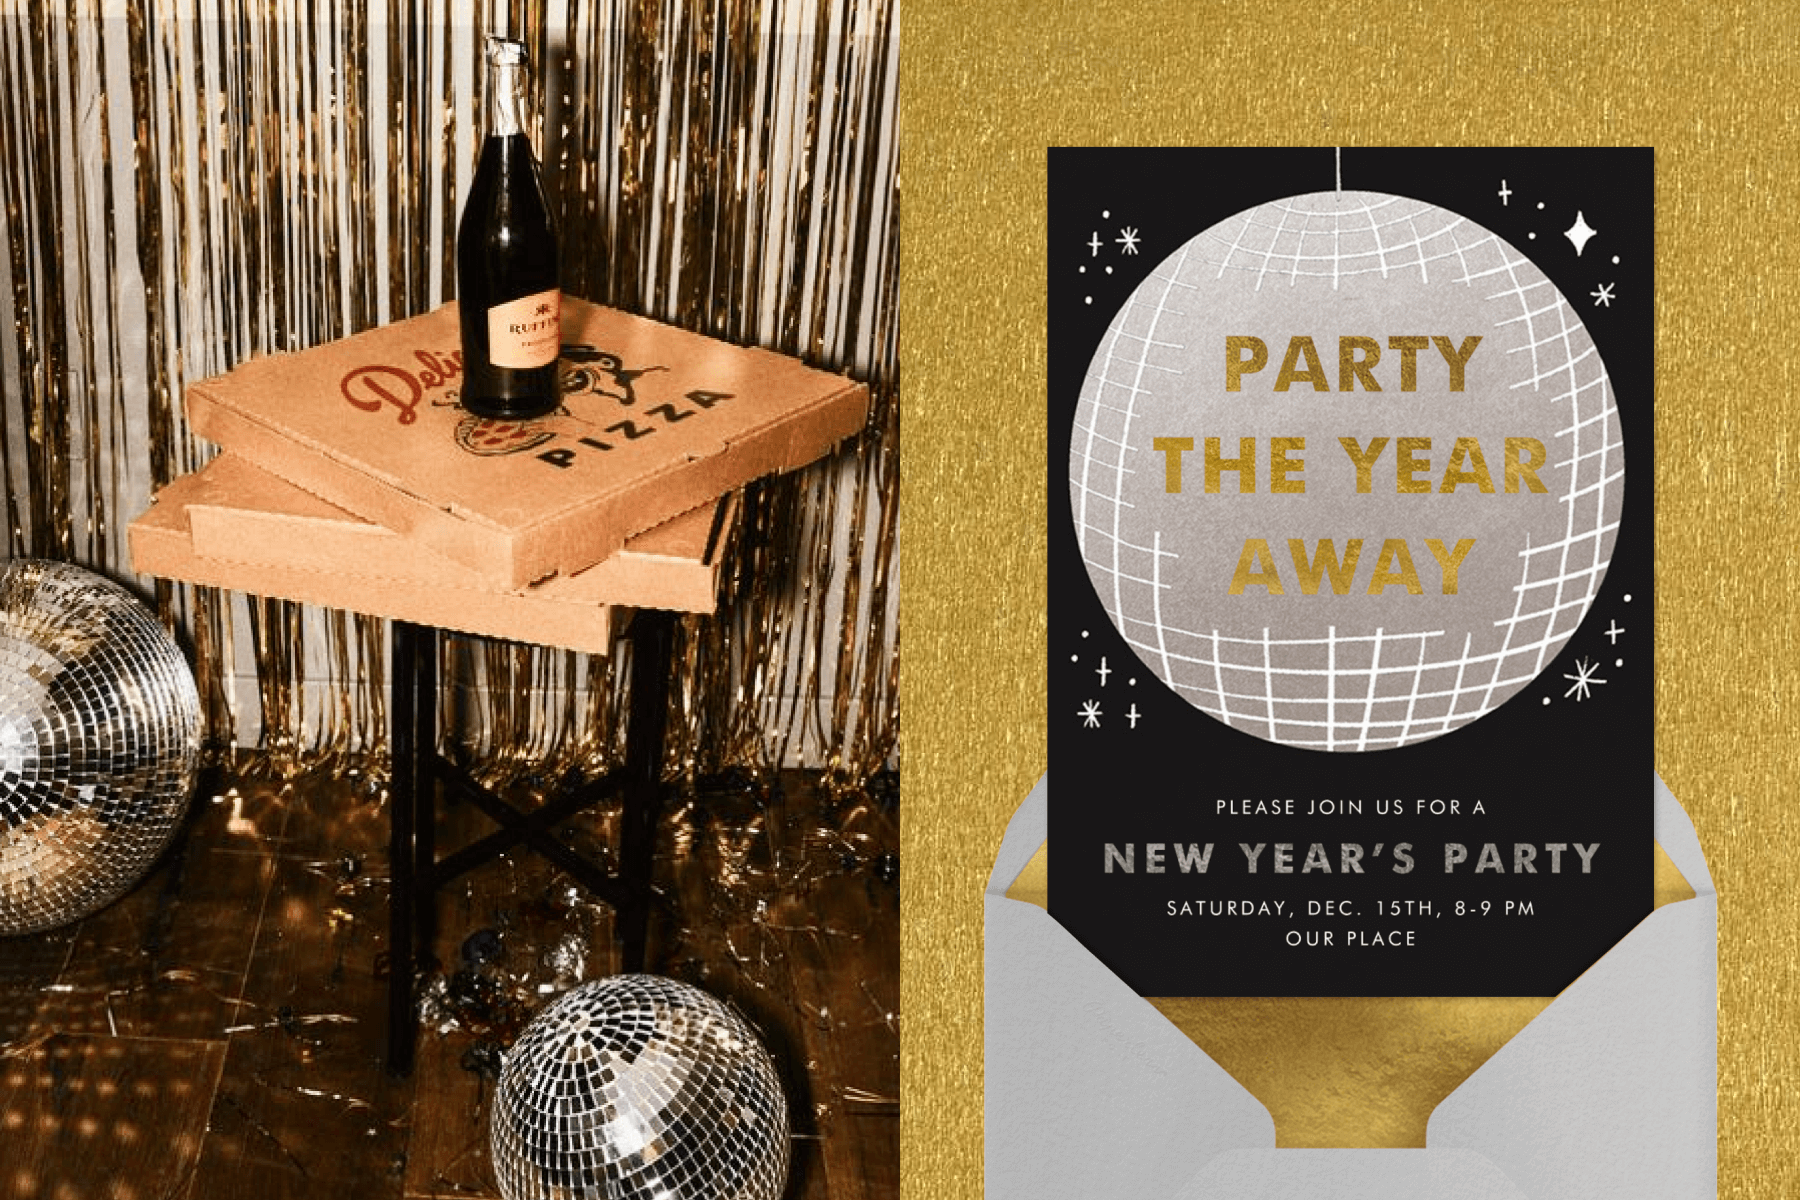 left: A stack of pizzas and a bottle of champage on a small table. There are a few festive decorations. On the floor are disco balls.. Right: A New Year’s Eve party invitation with a large disco ball on a black background and the words “Party the year away.”